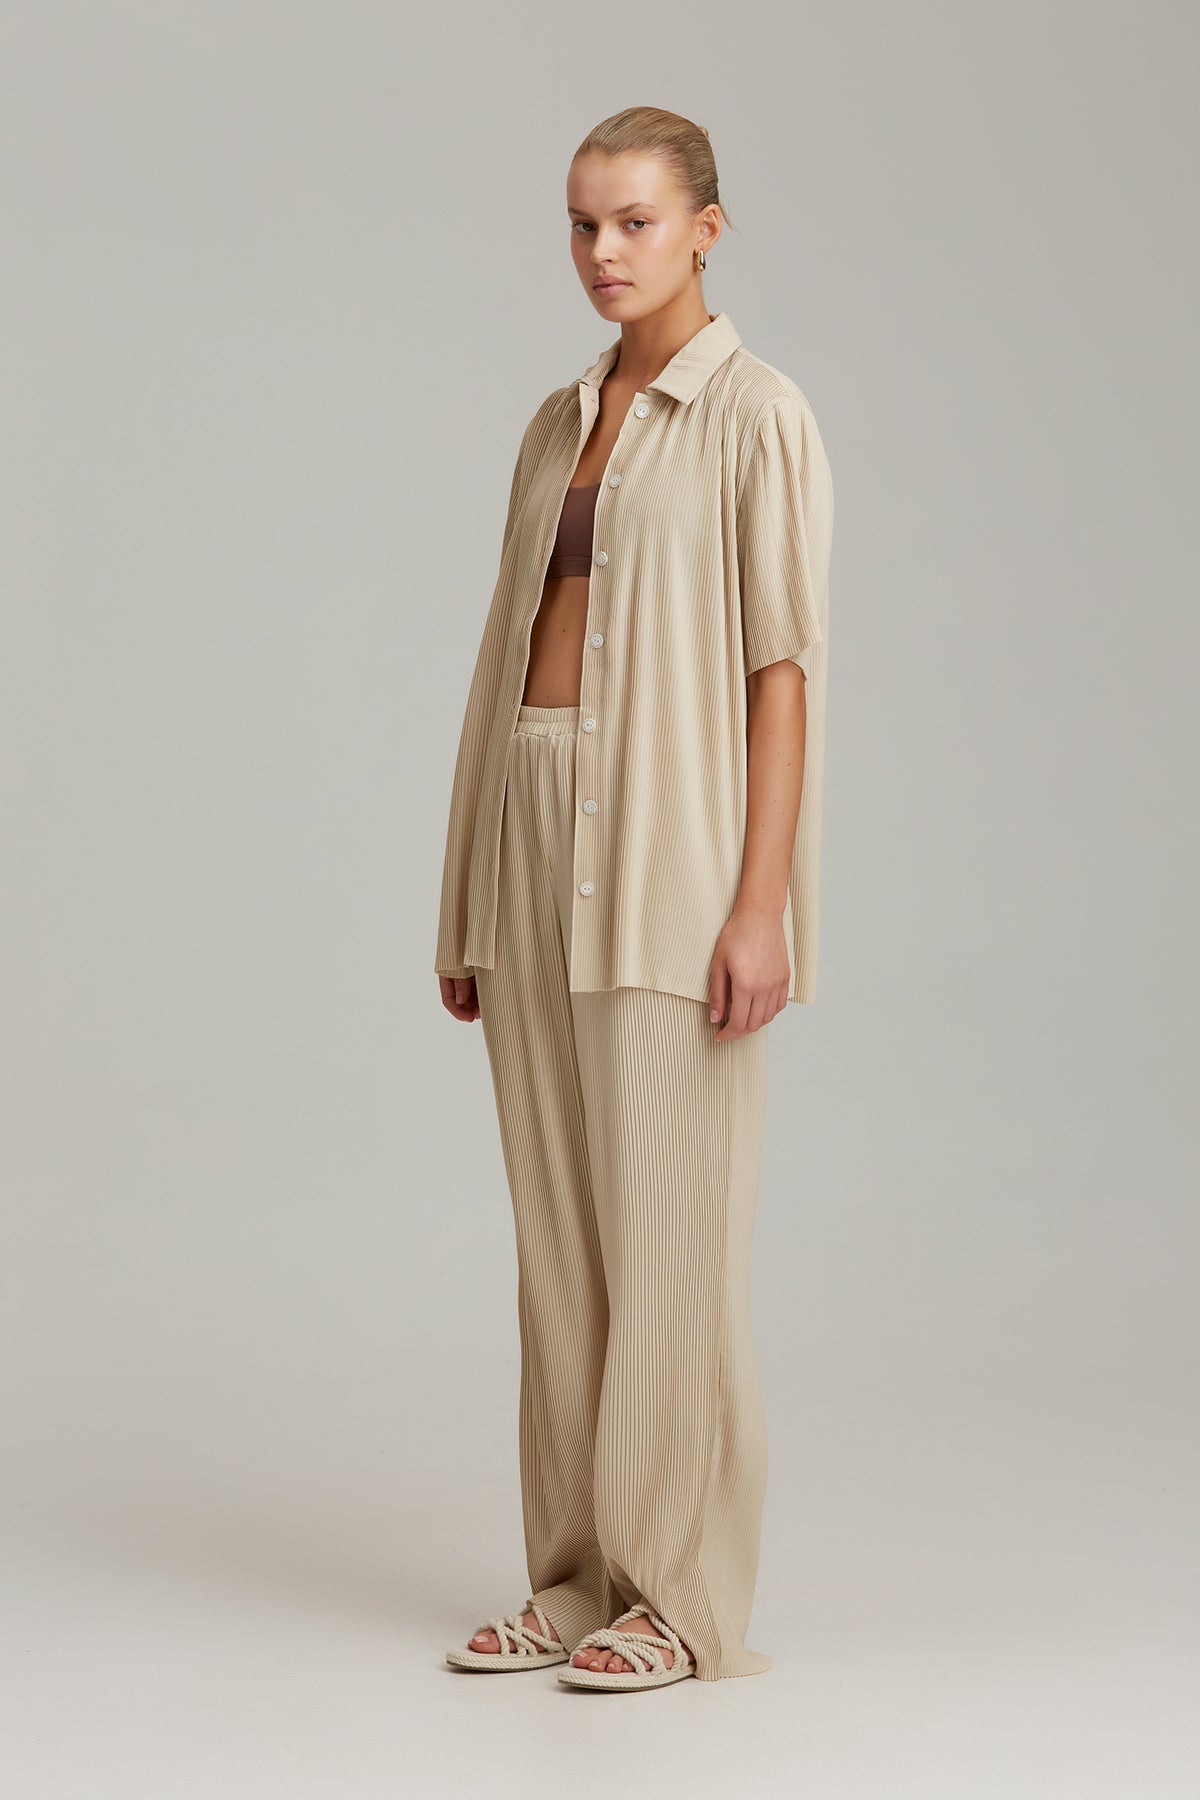 C/MEO Collective - Double Exposure Pant - Oat